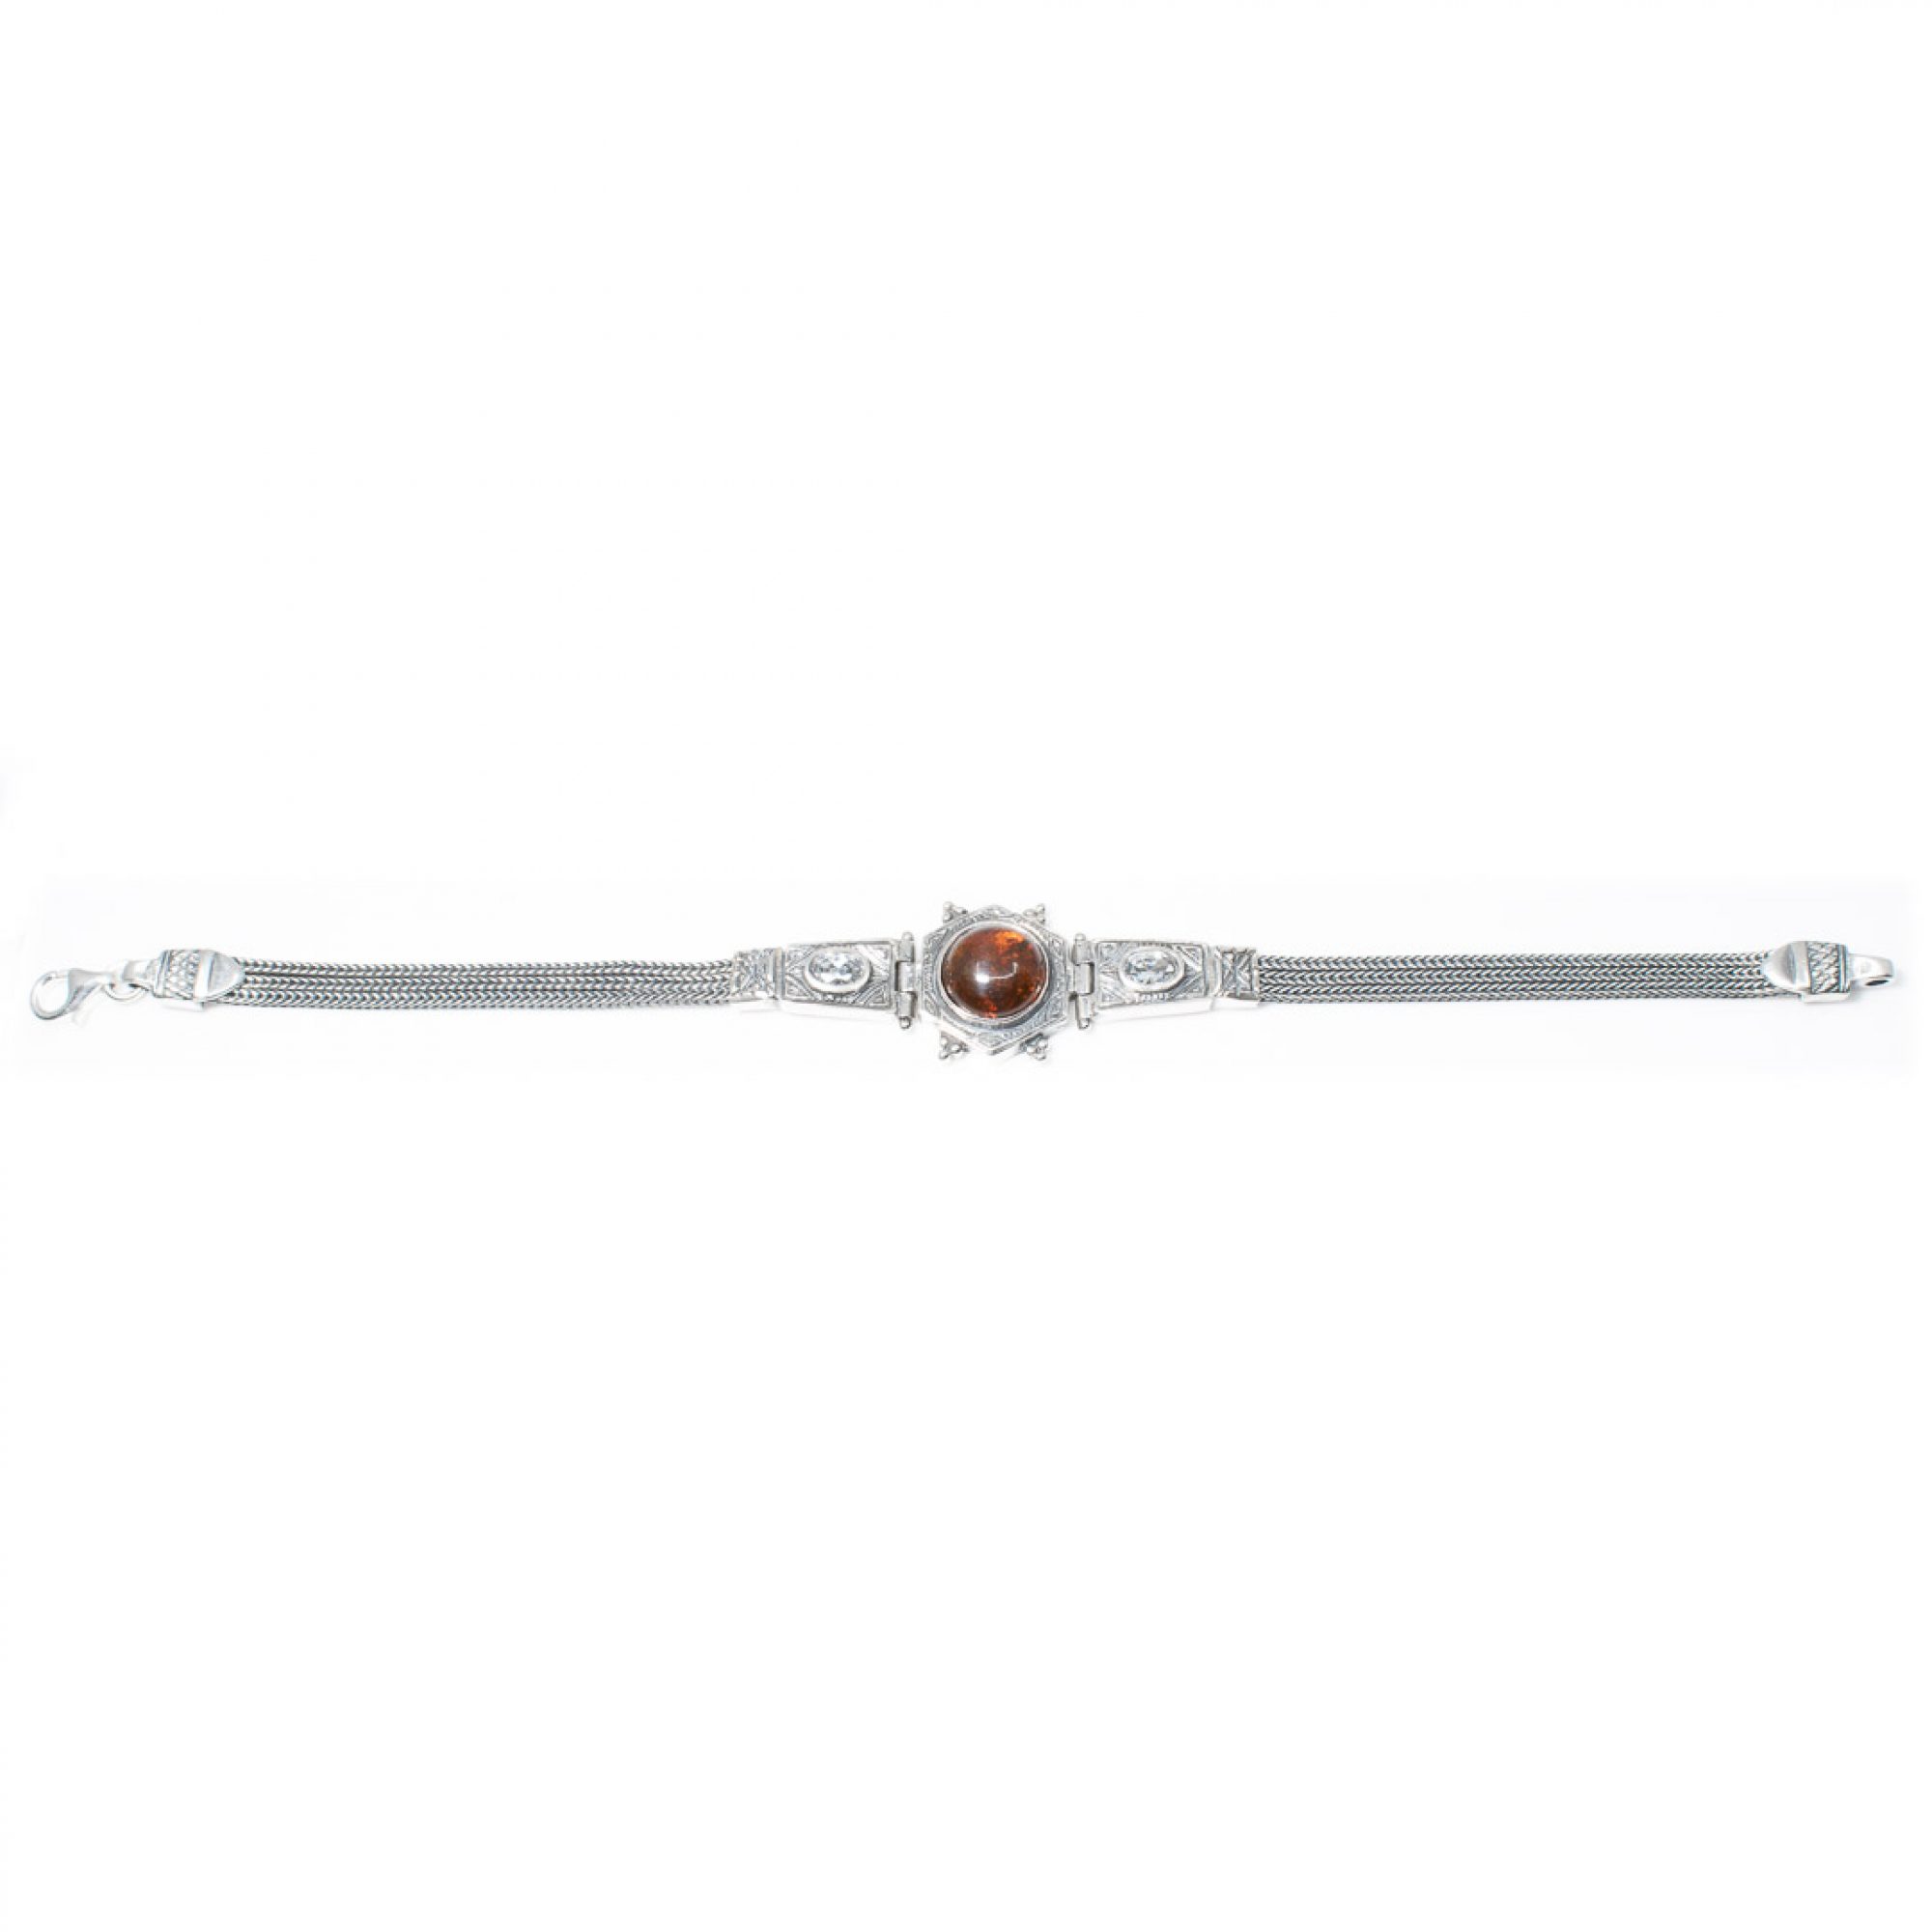 Oxidised bracelet with natural amber and zircon stones